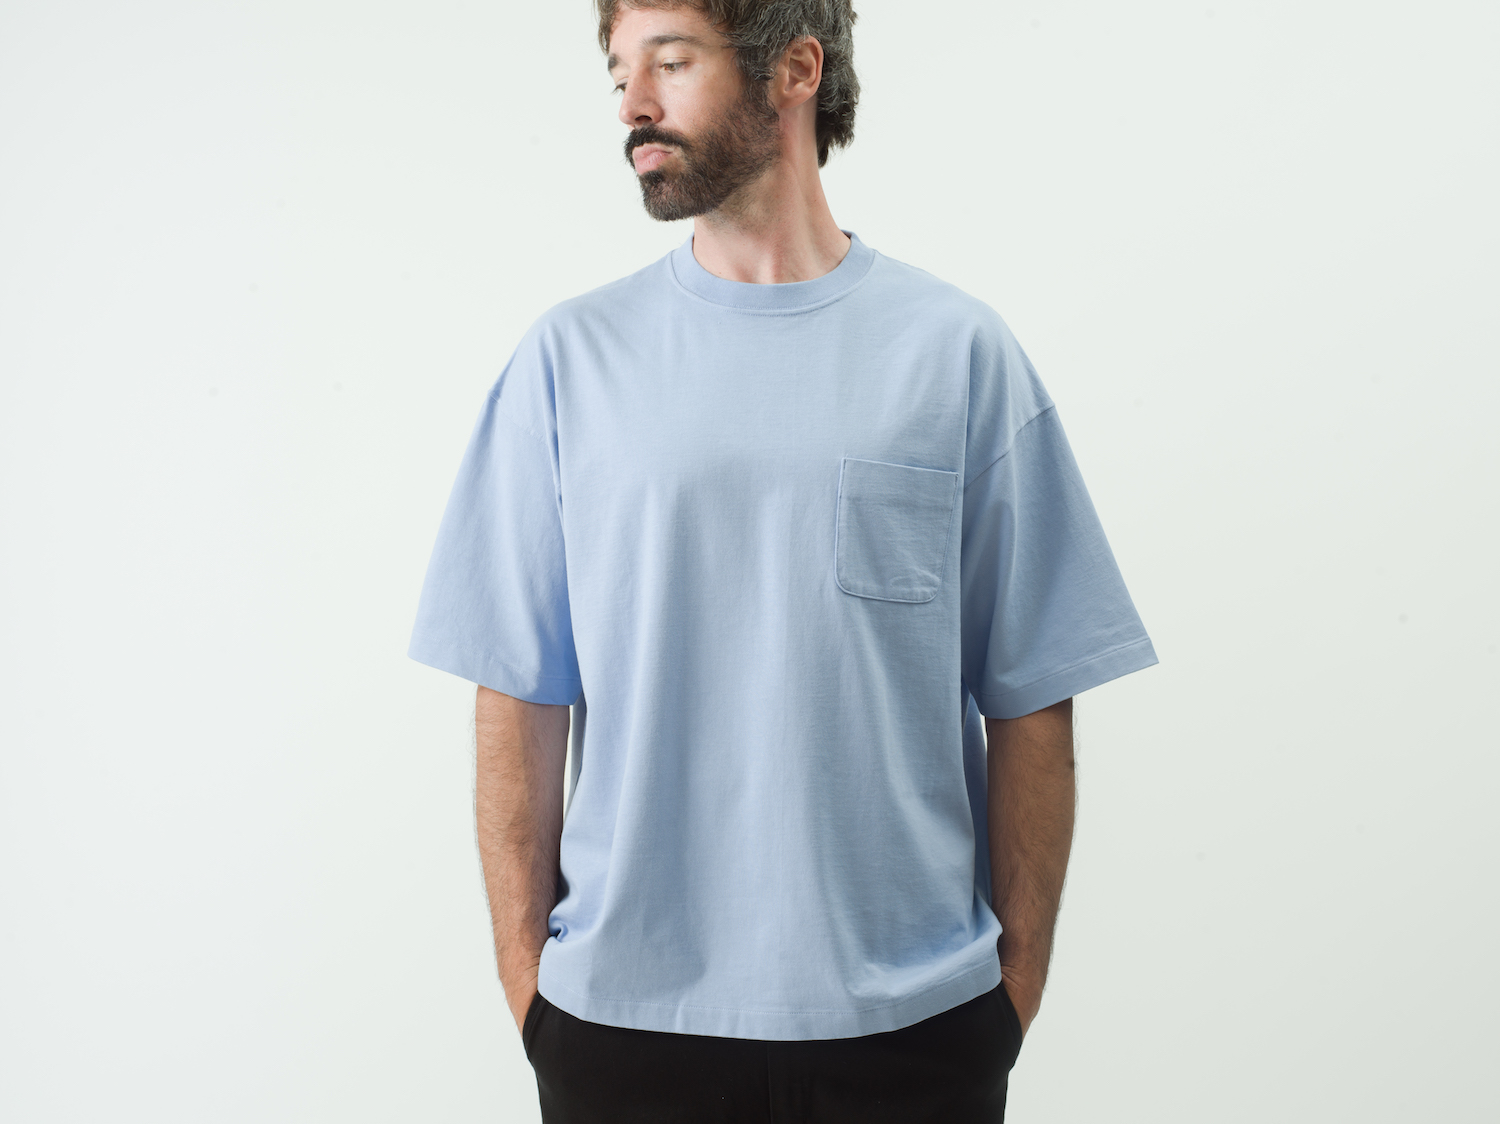 Wide Pocket S/S Tee & L/S Tee
New Color